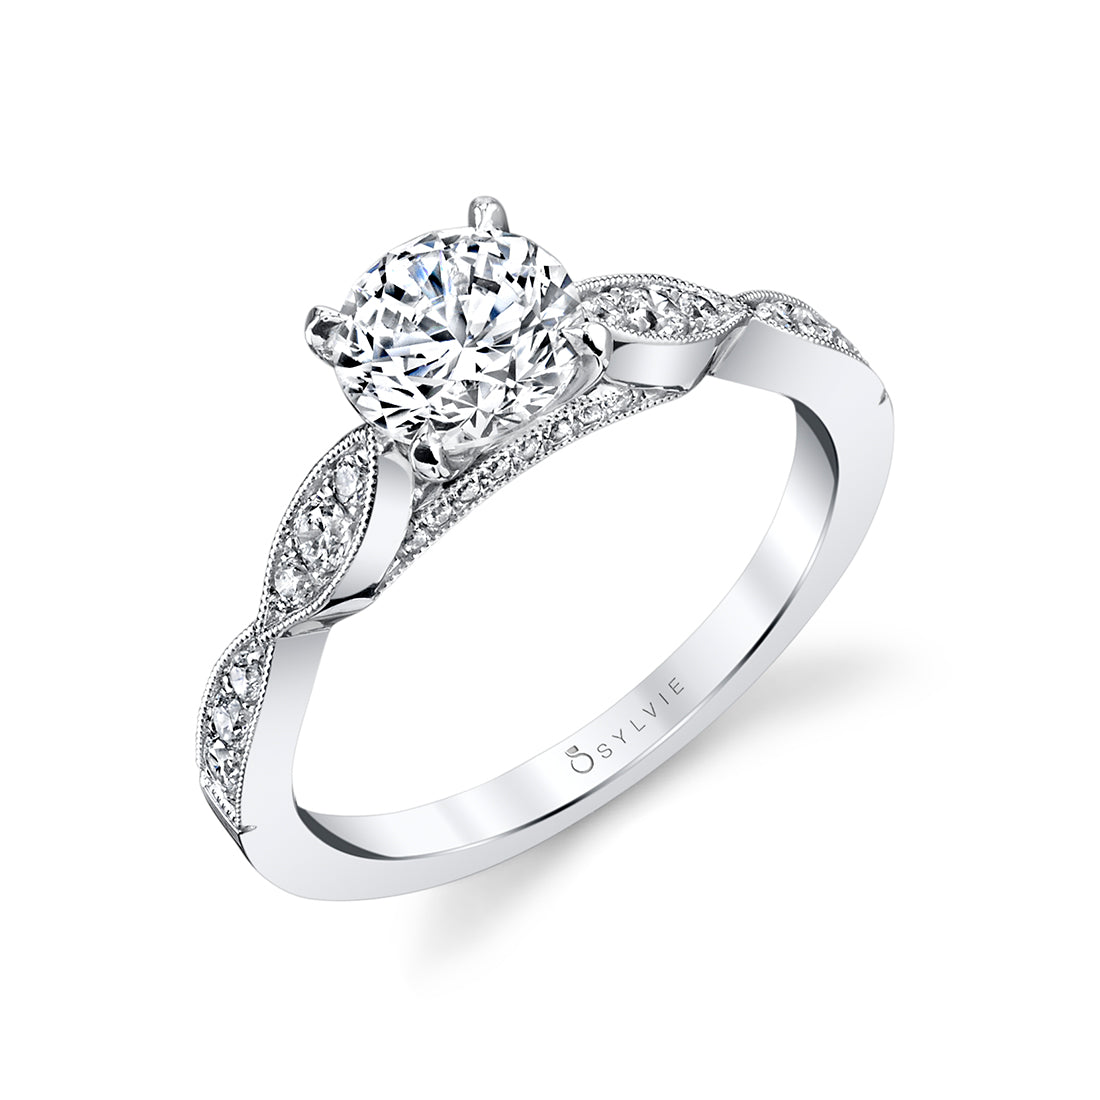 Sylvie 14K White Gold Stackable Engagement "Esme" Ring